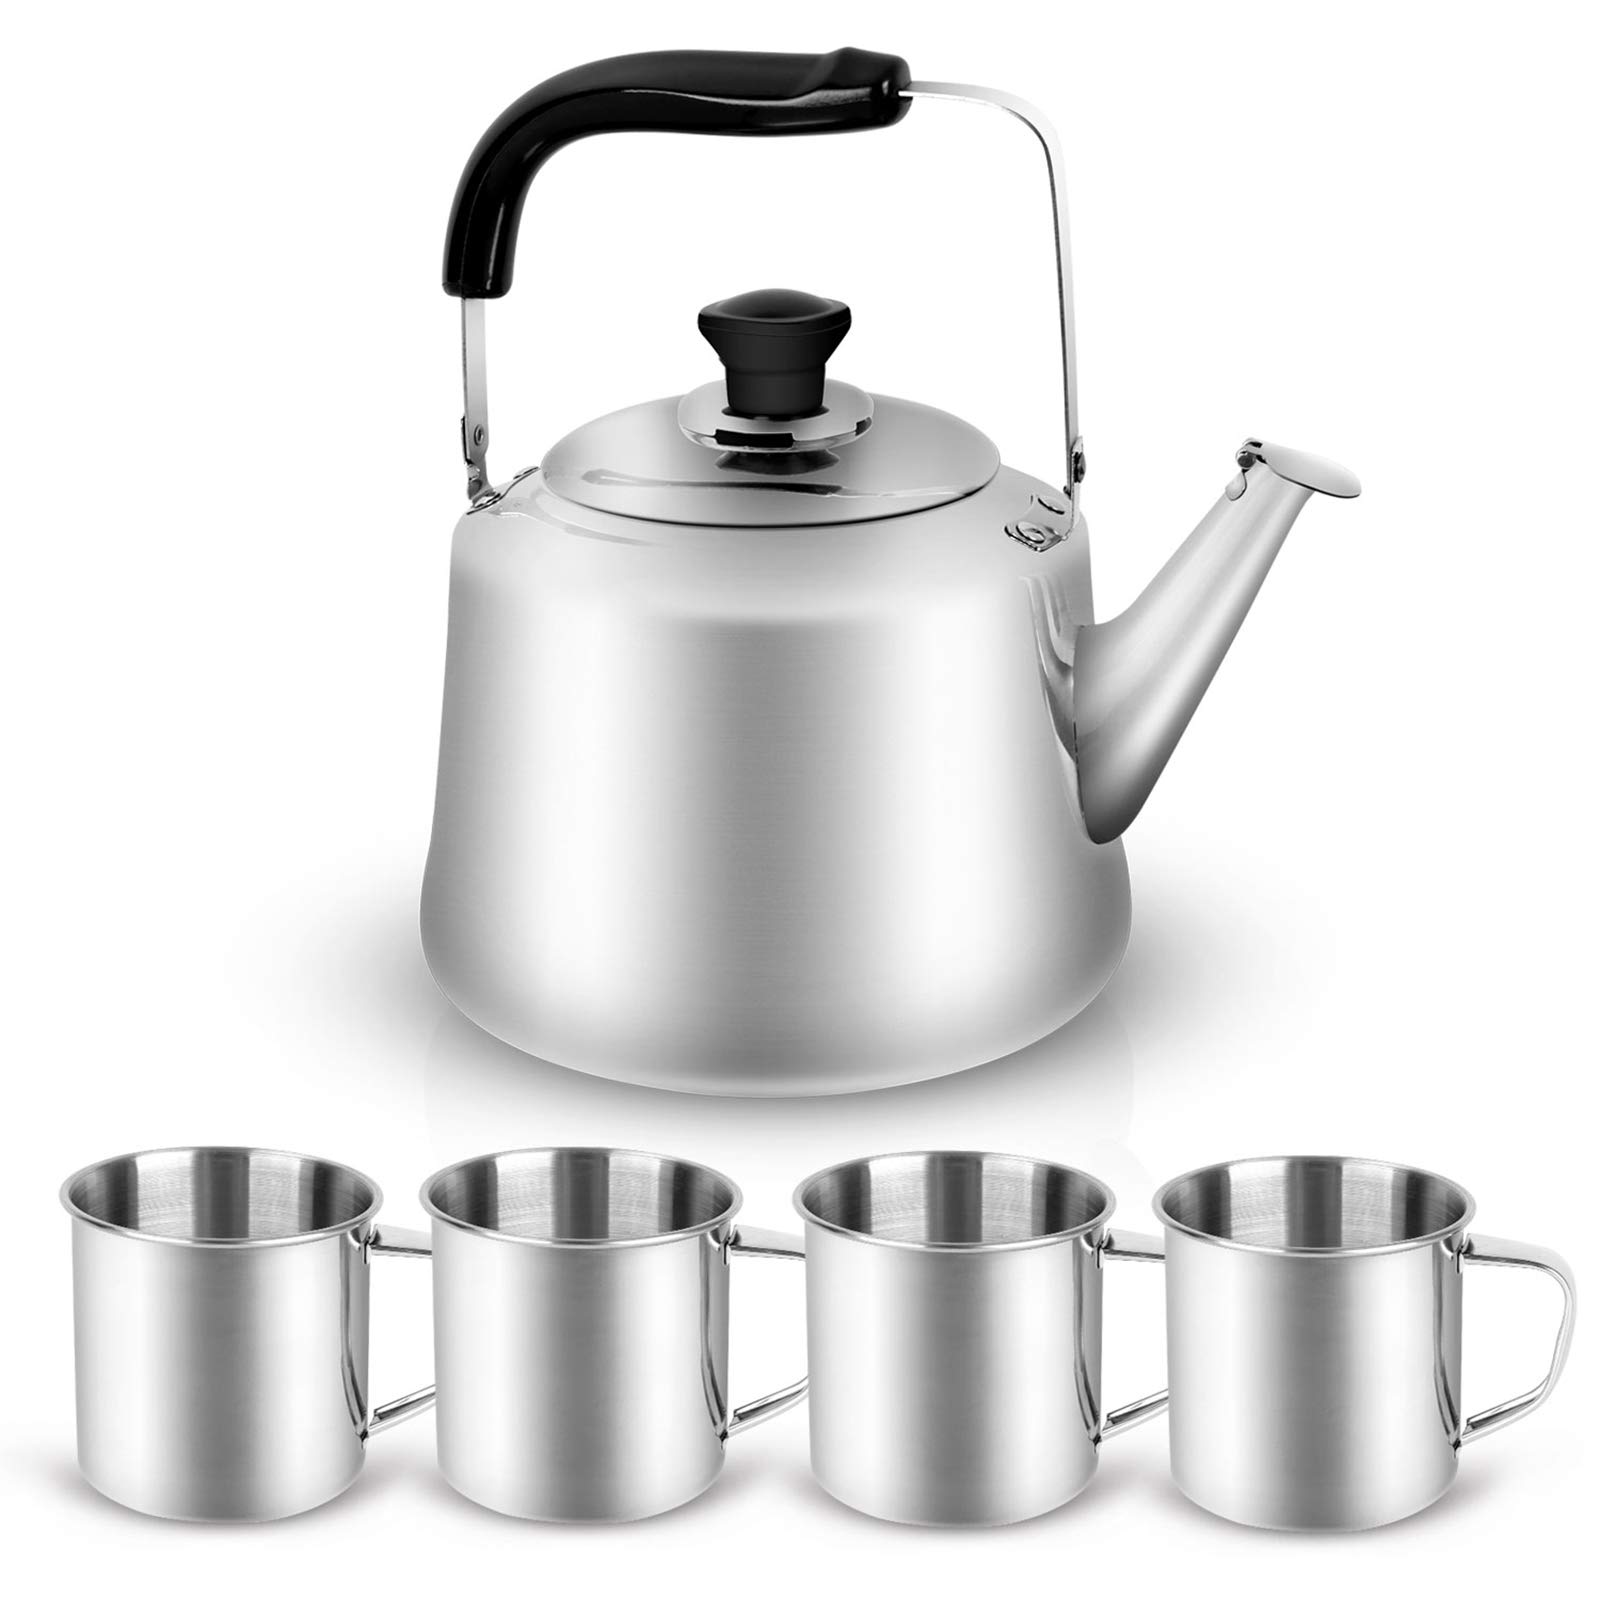 Stainless Steel Camp Fire Kettle, Camping Tea Kettle